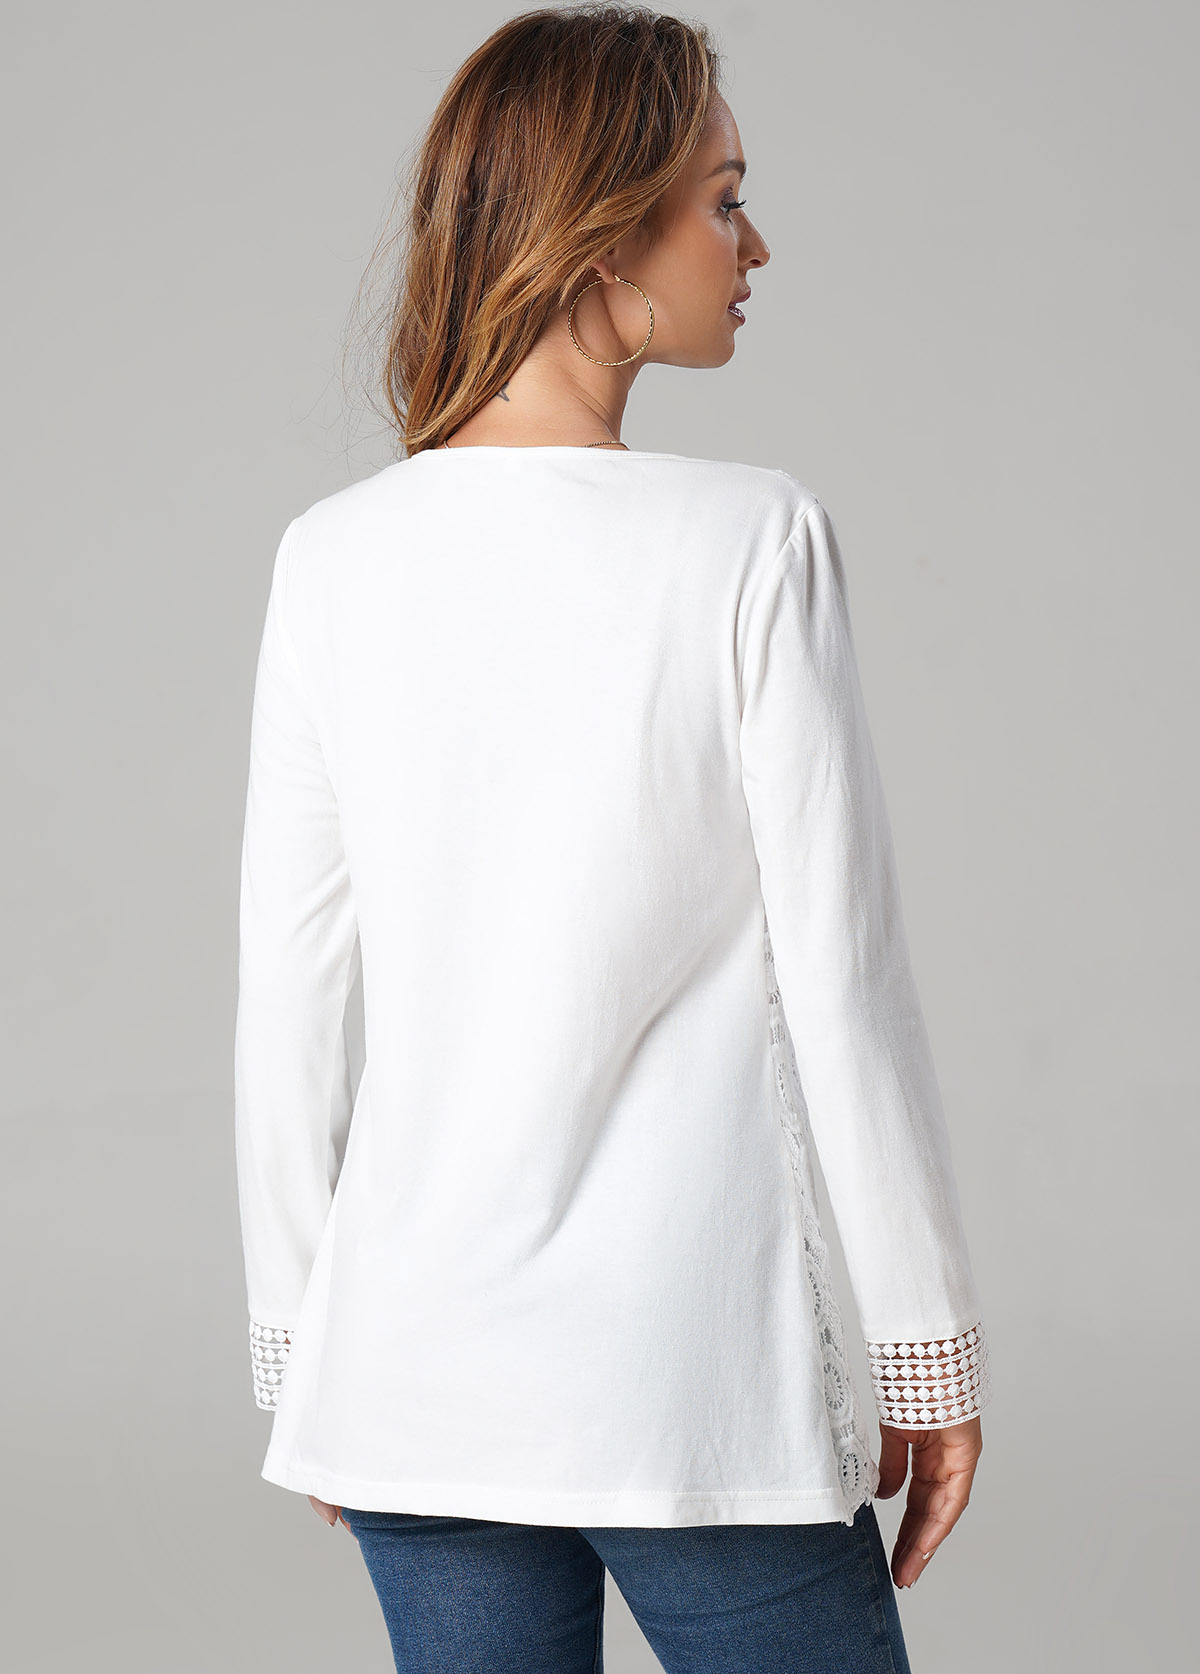 Lace Splicing Solid Long Sleeve V Neck T Shirt | modlily.com - USD 32.98